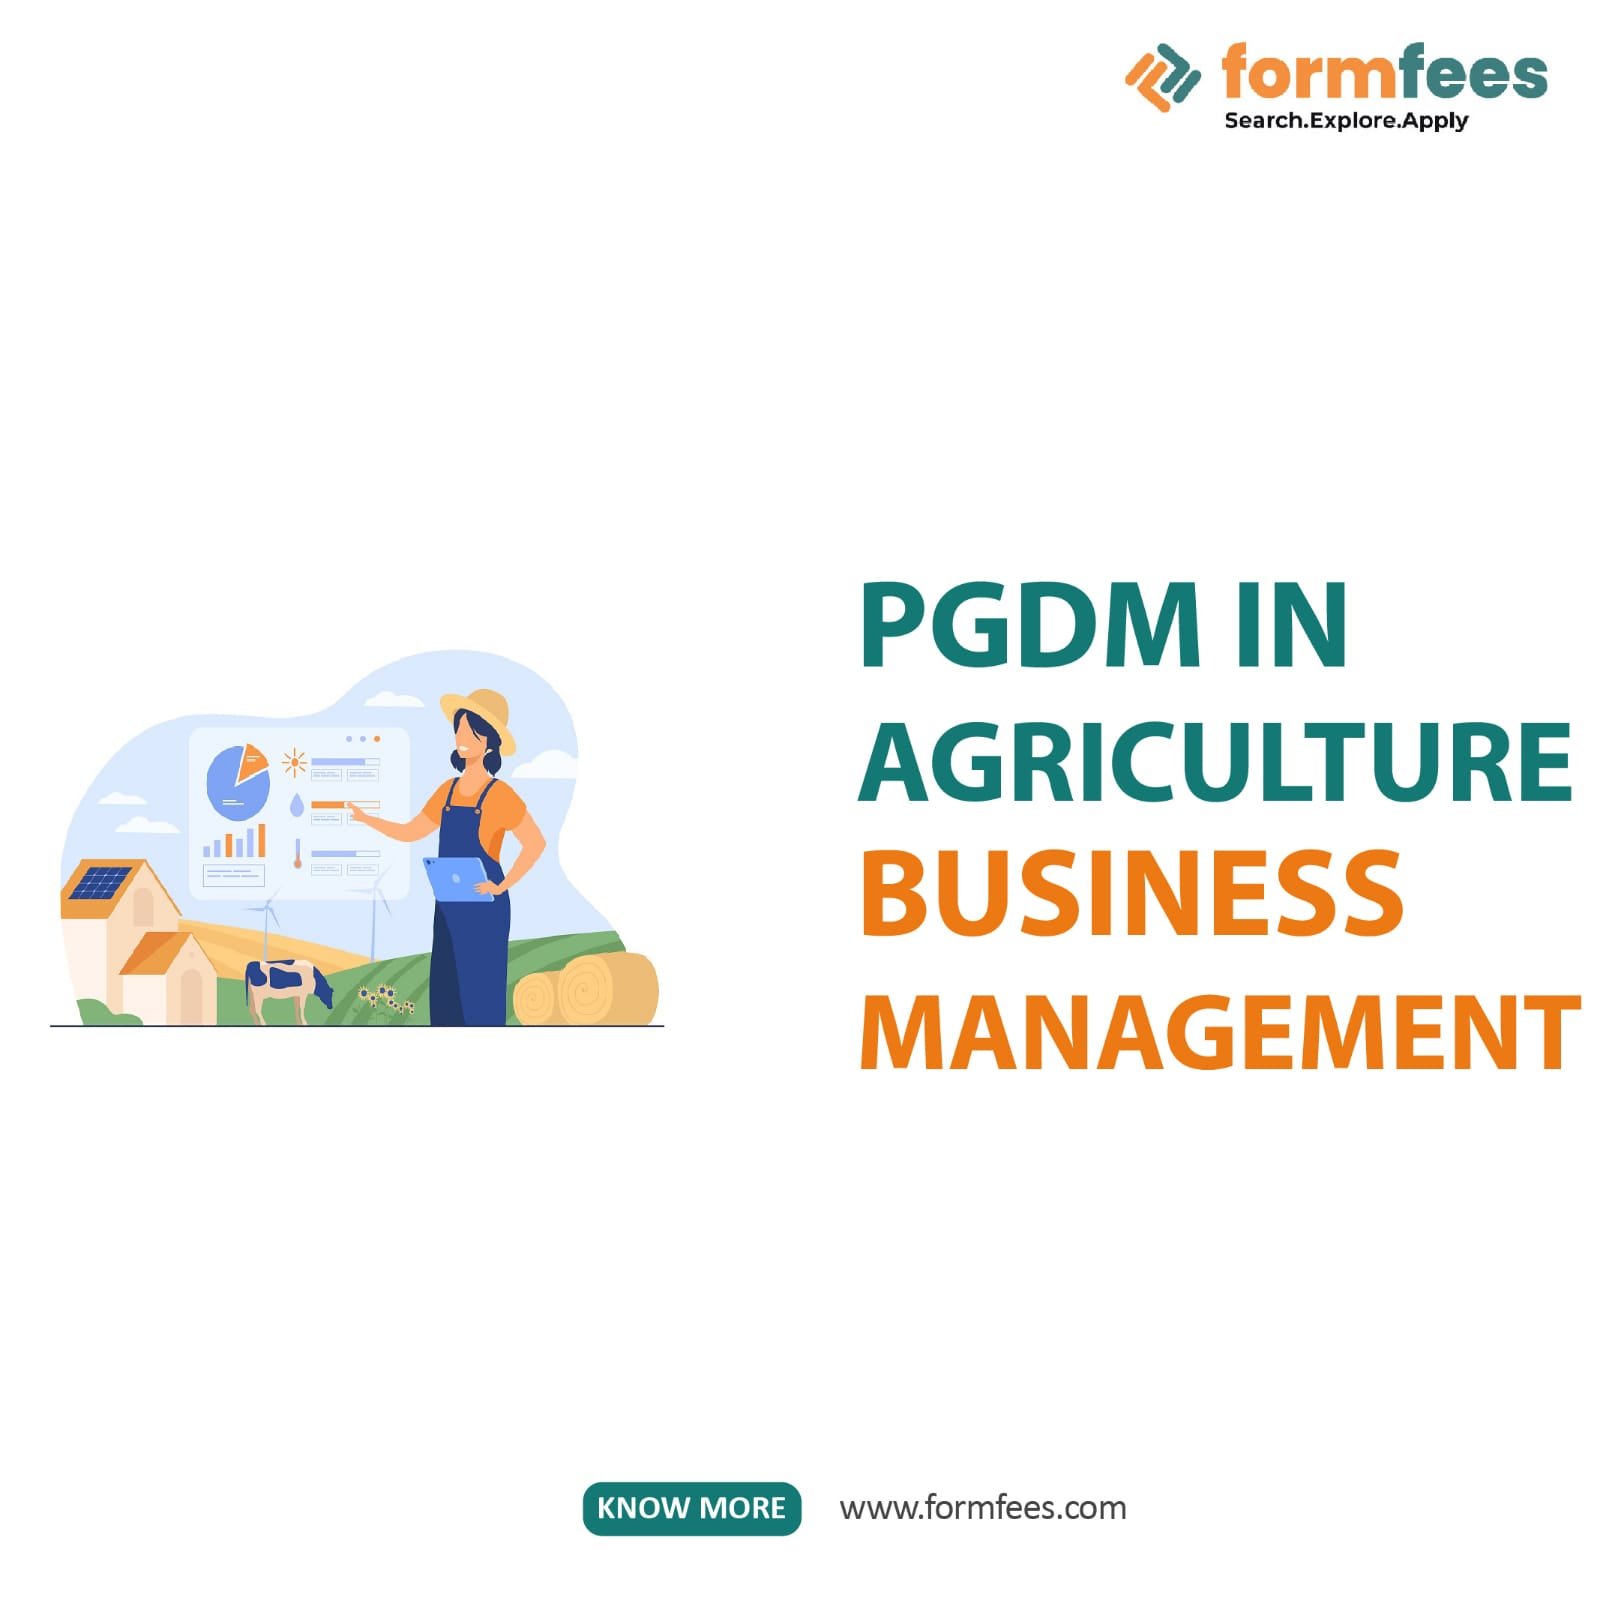 PGDM in Agriculture Business Management